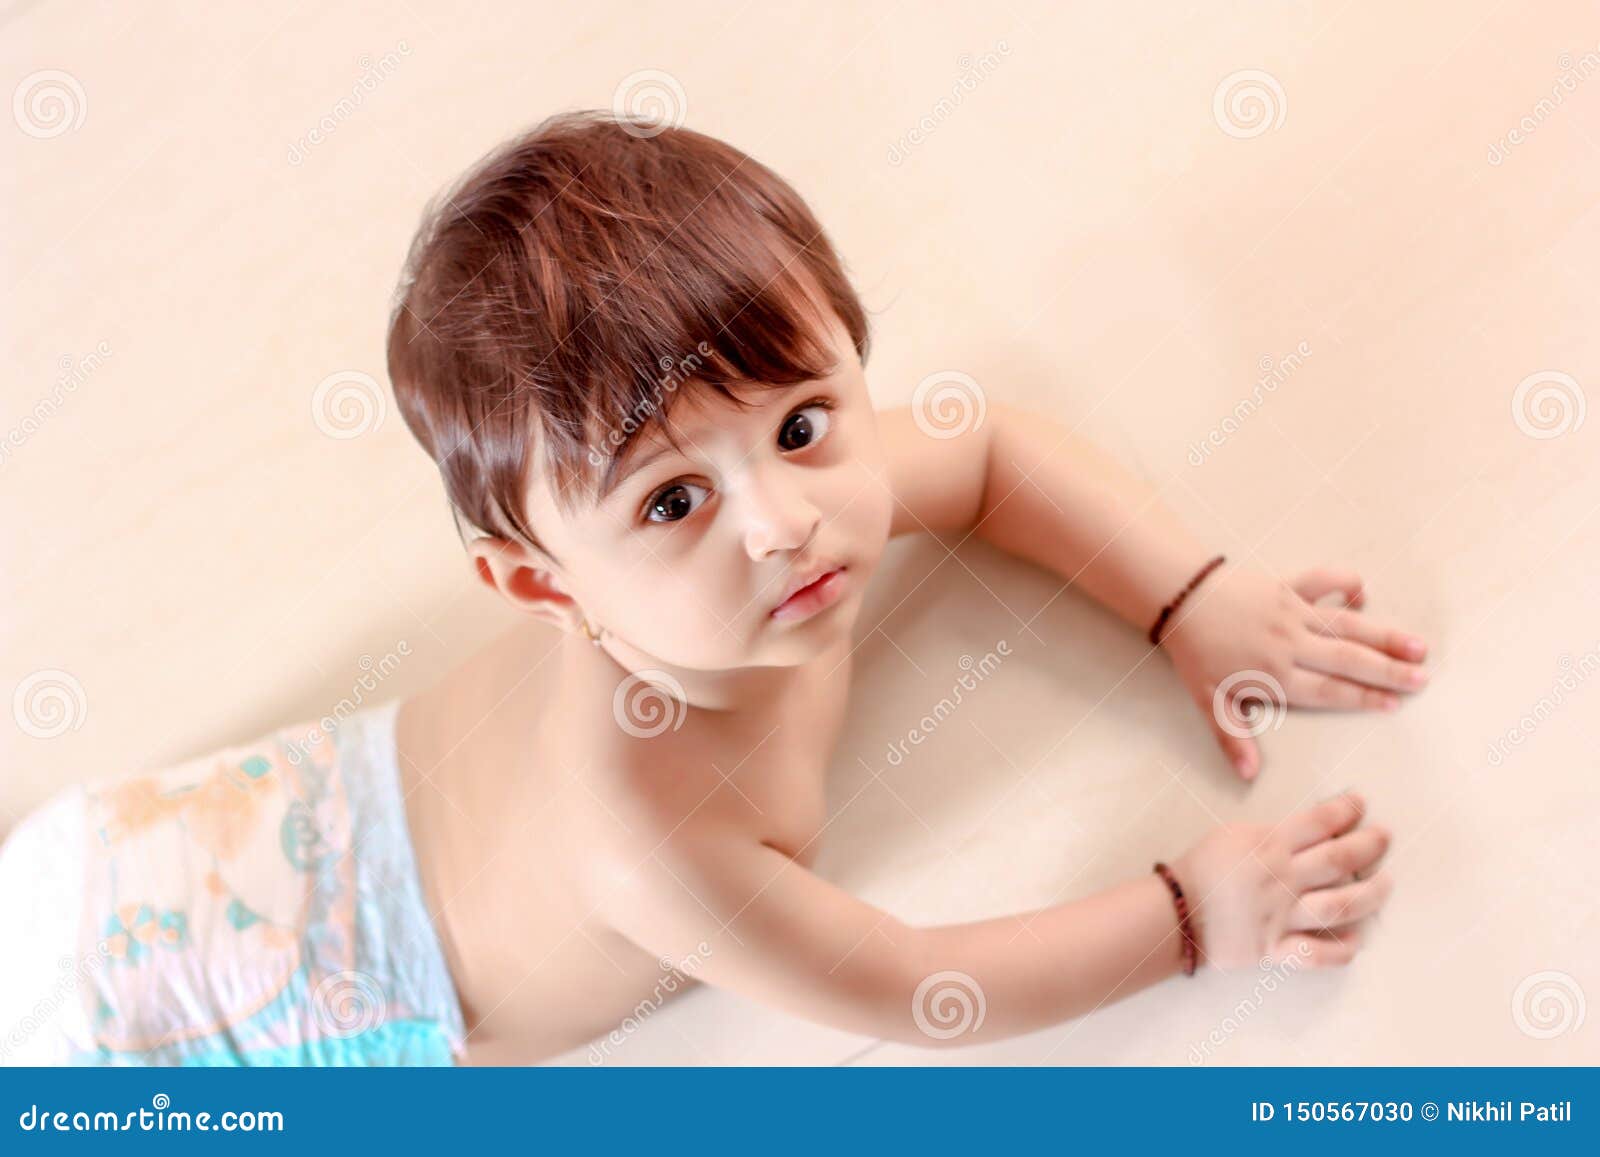 Cute Indian Baby Boy in Diaper Stock Photo - Image of caucasian ...